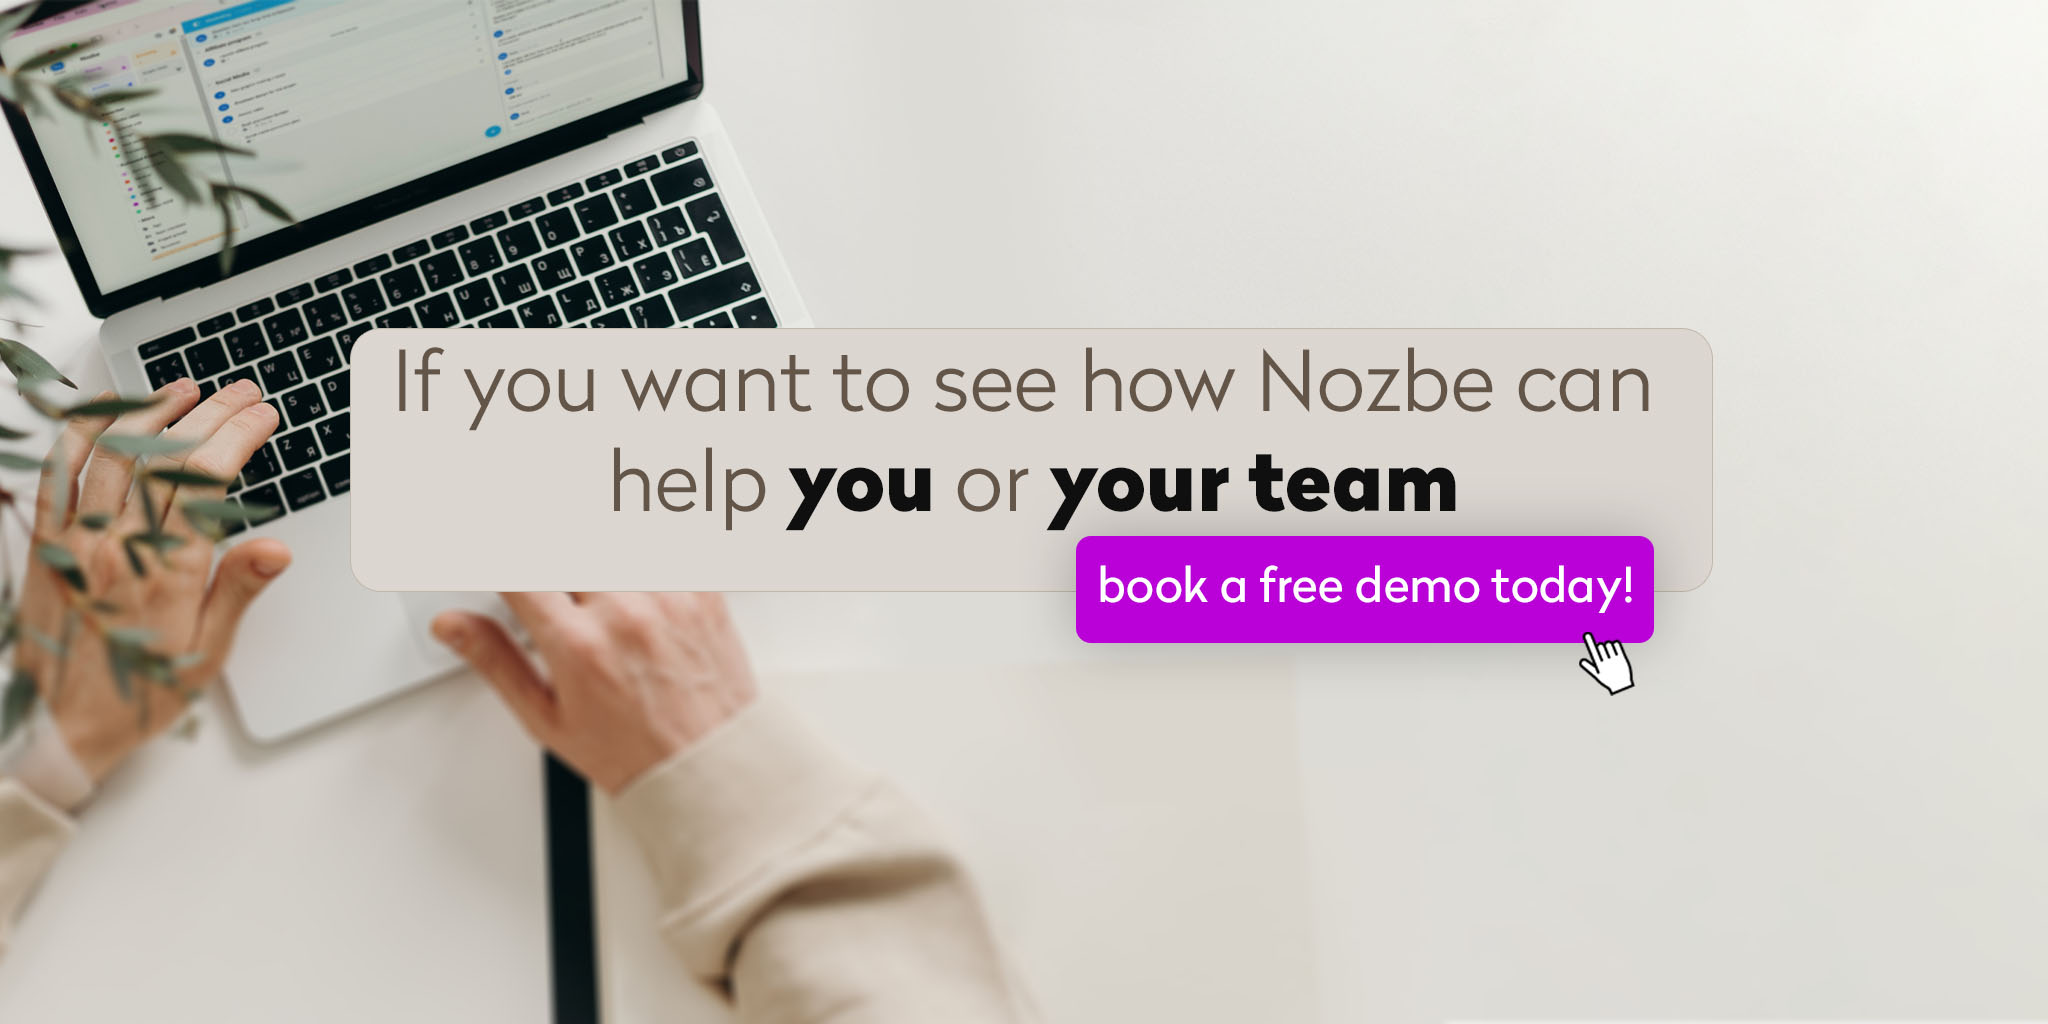 Book a free productivity and team cooperation demo and learn how Nozbe can help you